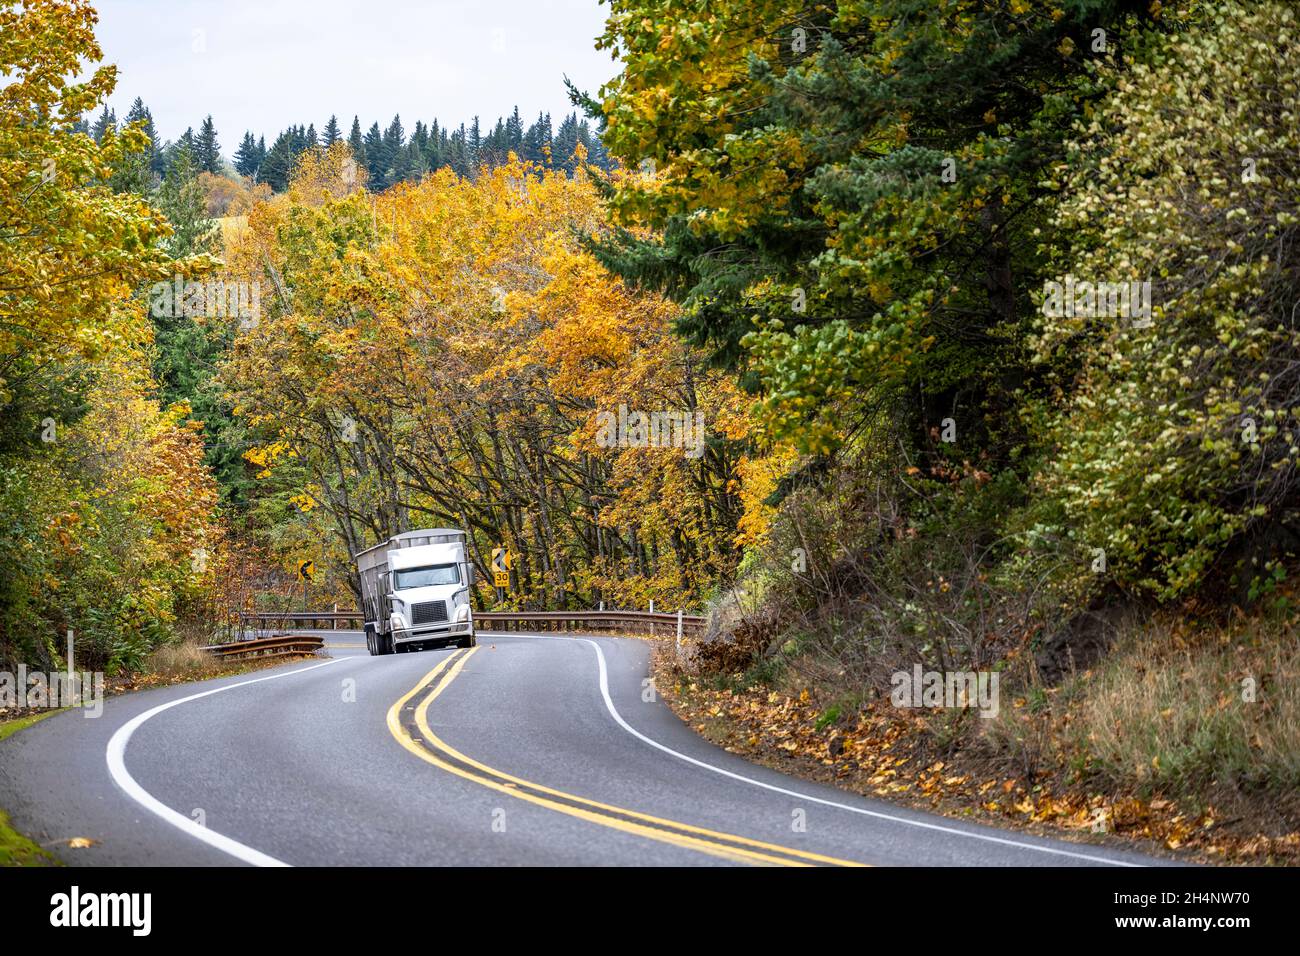 Big rig white semi truck with high cab transporting commercial cargo in covered bulk semi trailer running for delivery climbing up hill on the winding Stock Photo